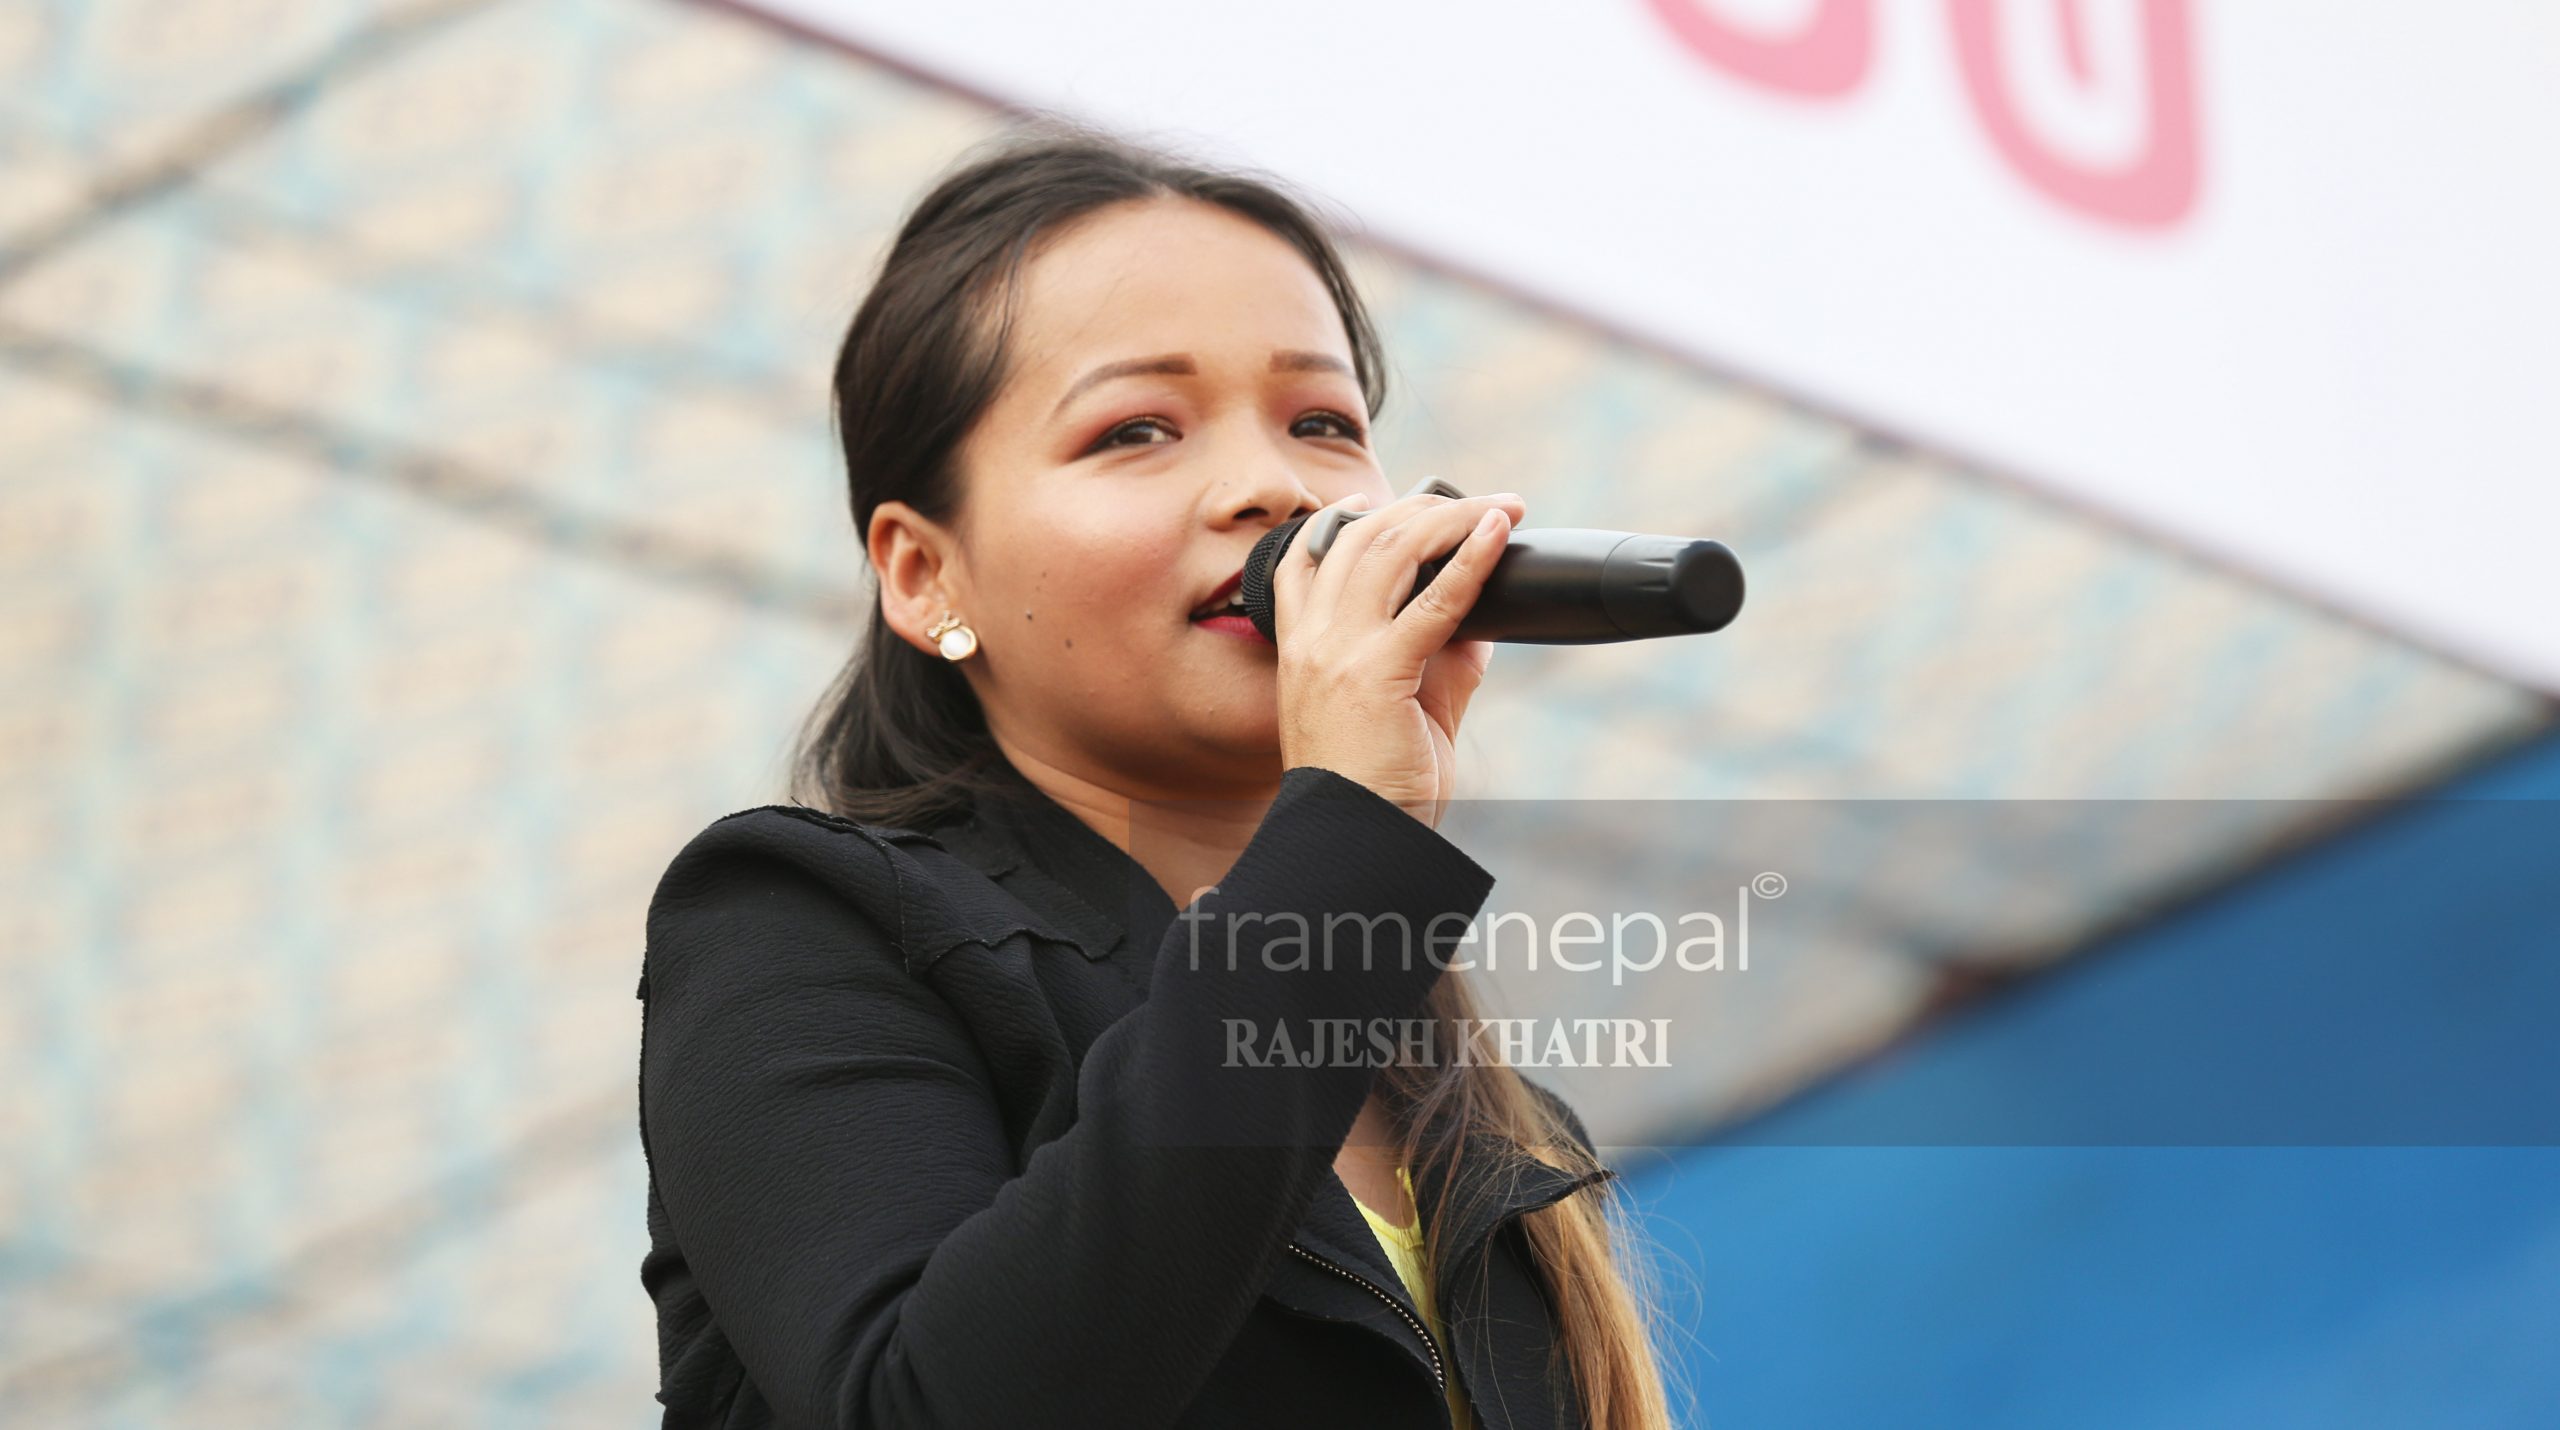 Bhumika Giri, Bhumika Giri is a Nepalese folk(Lok Dohori) singer. She is known as Stage Queen because of her stage performances. Singer Bhumika Giri has recorded over 300 songs. bhumika giri new song,bhumika giri live dohori,bhumika giri lok dohori,bhumika giri video,bhumika giri song,